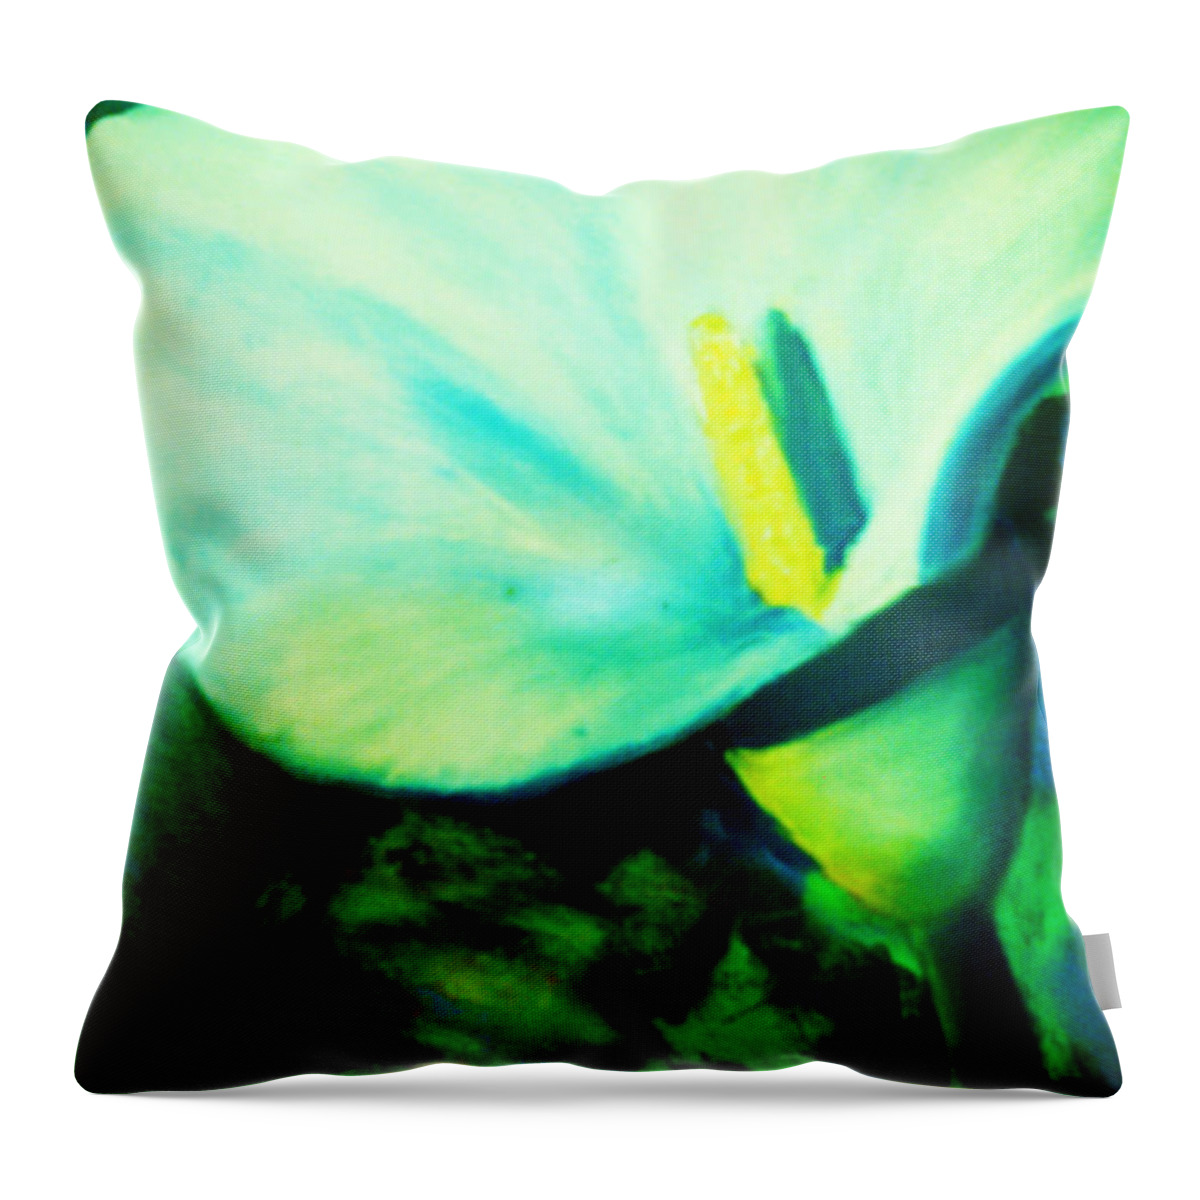 White Calla Lily Throw Pillow featuring the painting Calla Lily by Melinda Etzold